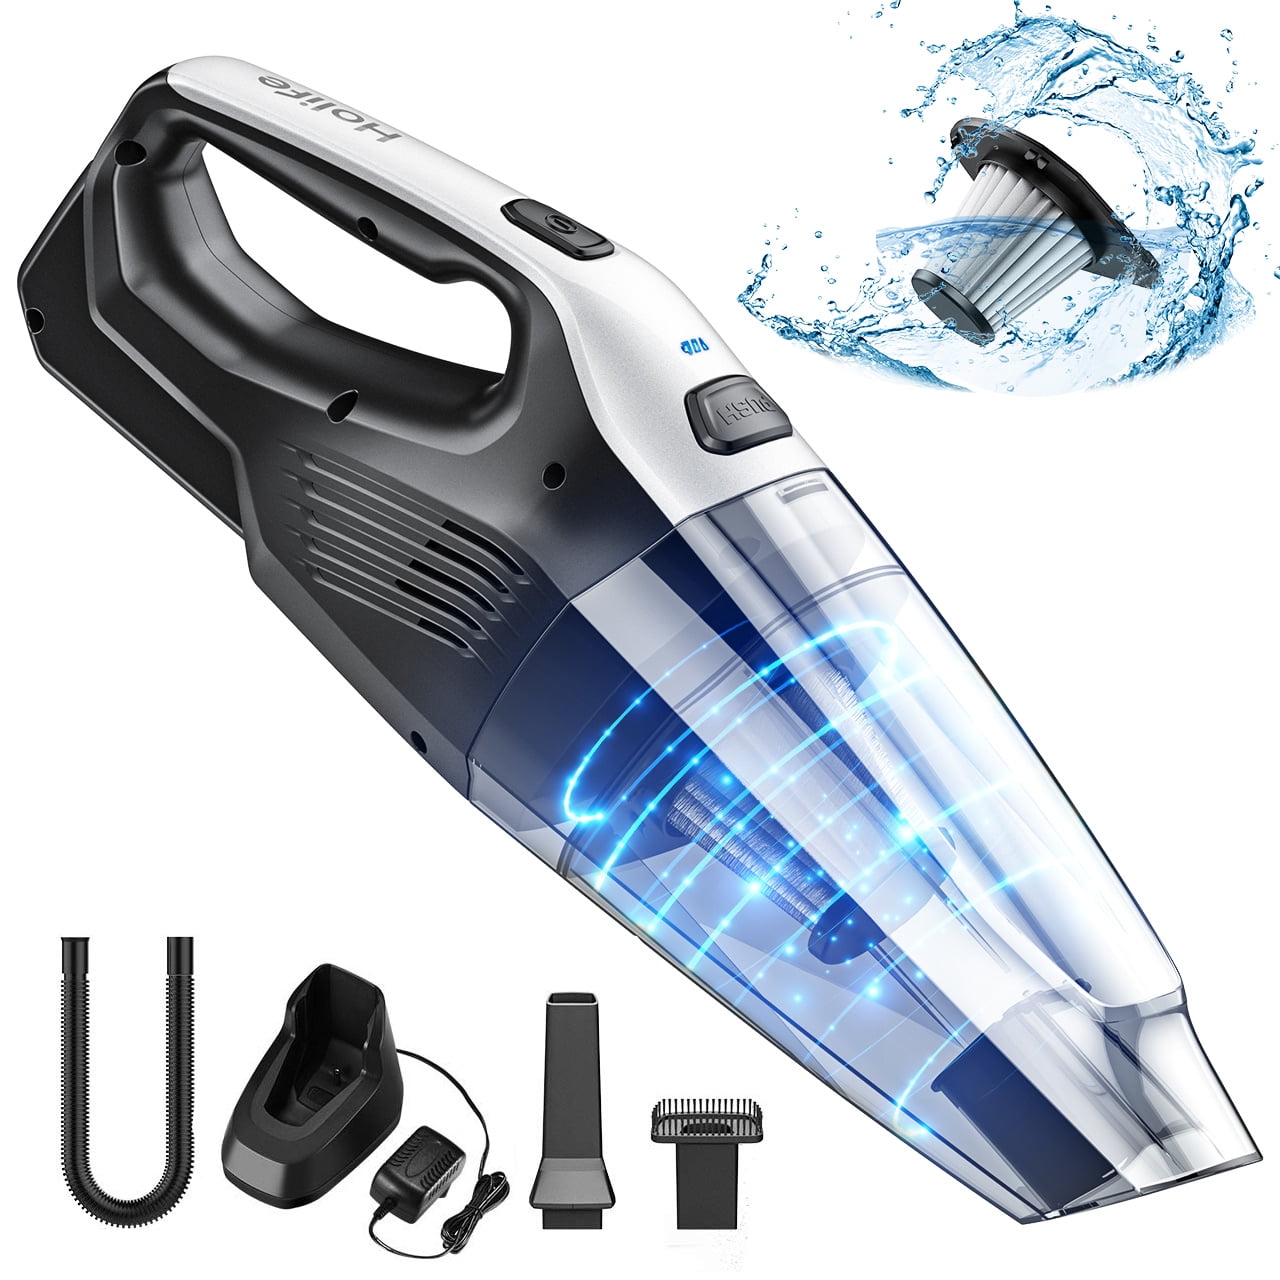 This 'powerful'  handheld vacuum has 89,000 reviews & it's 39% off  right now